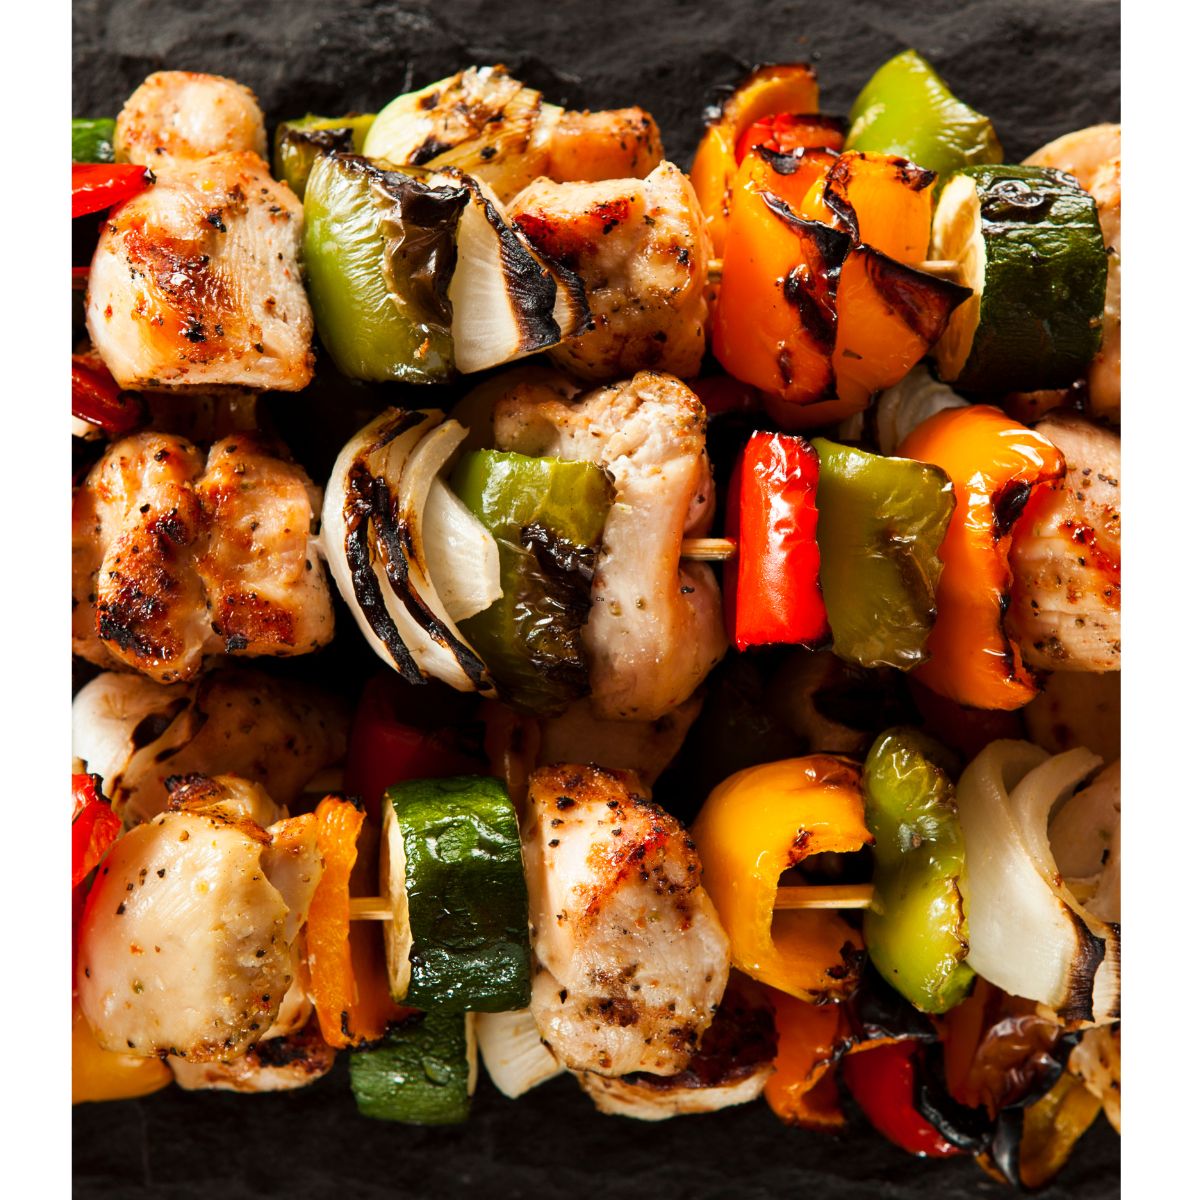 Chicken and vegetables on skewers.